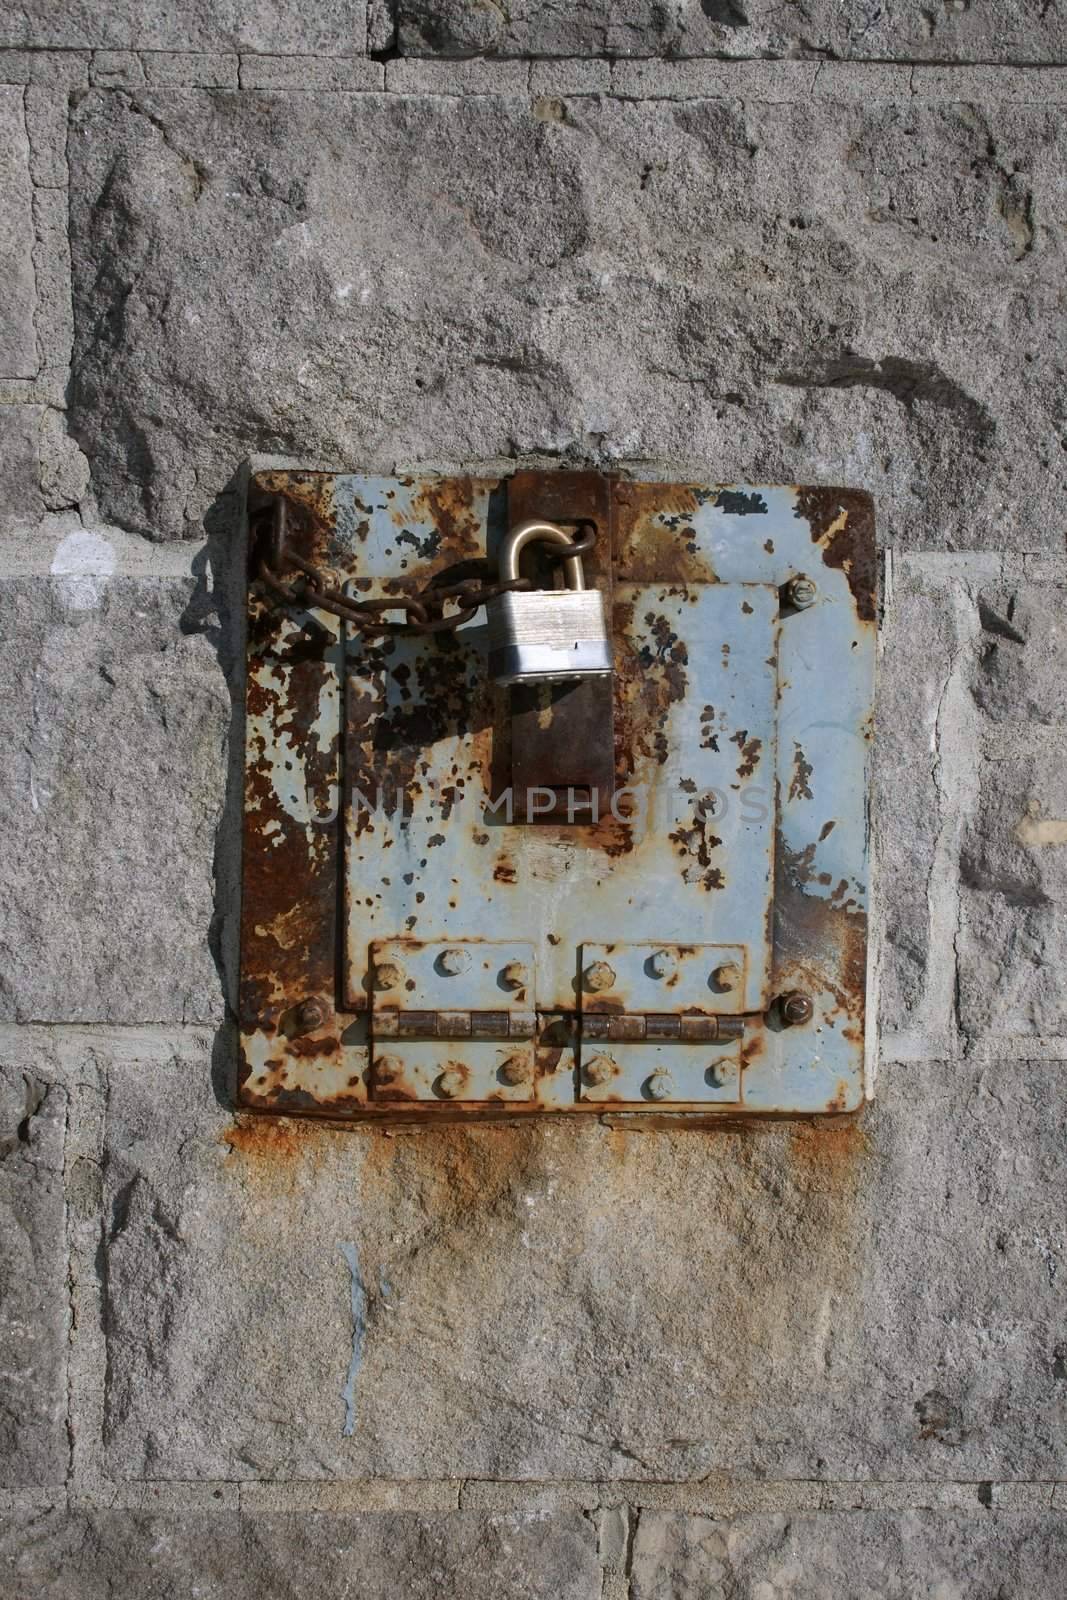 Iron lock and rusty metal on a stone wall.